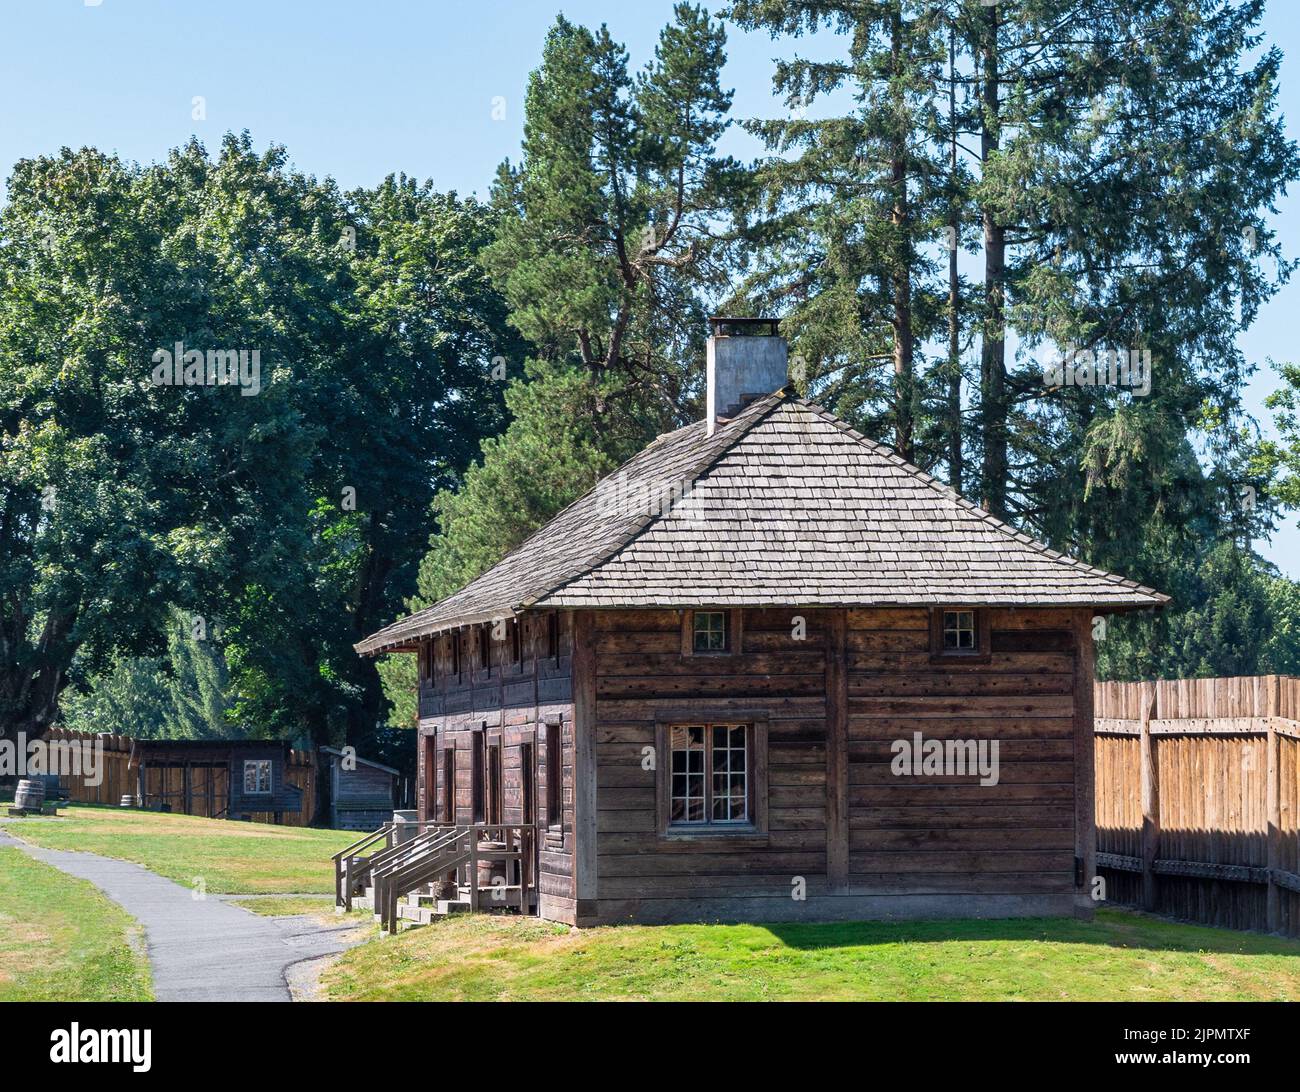 Historic wood log residential building in British Columbia Stock Photo